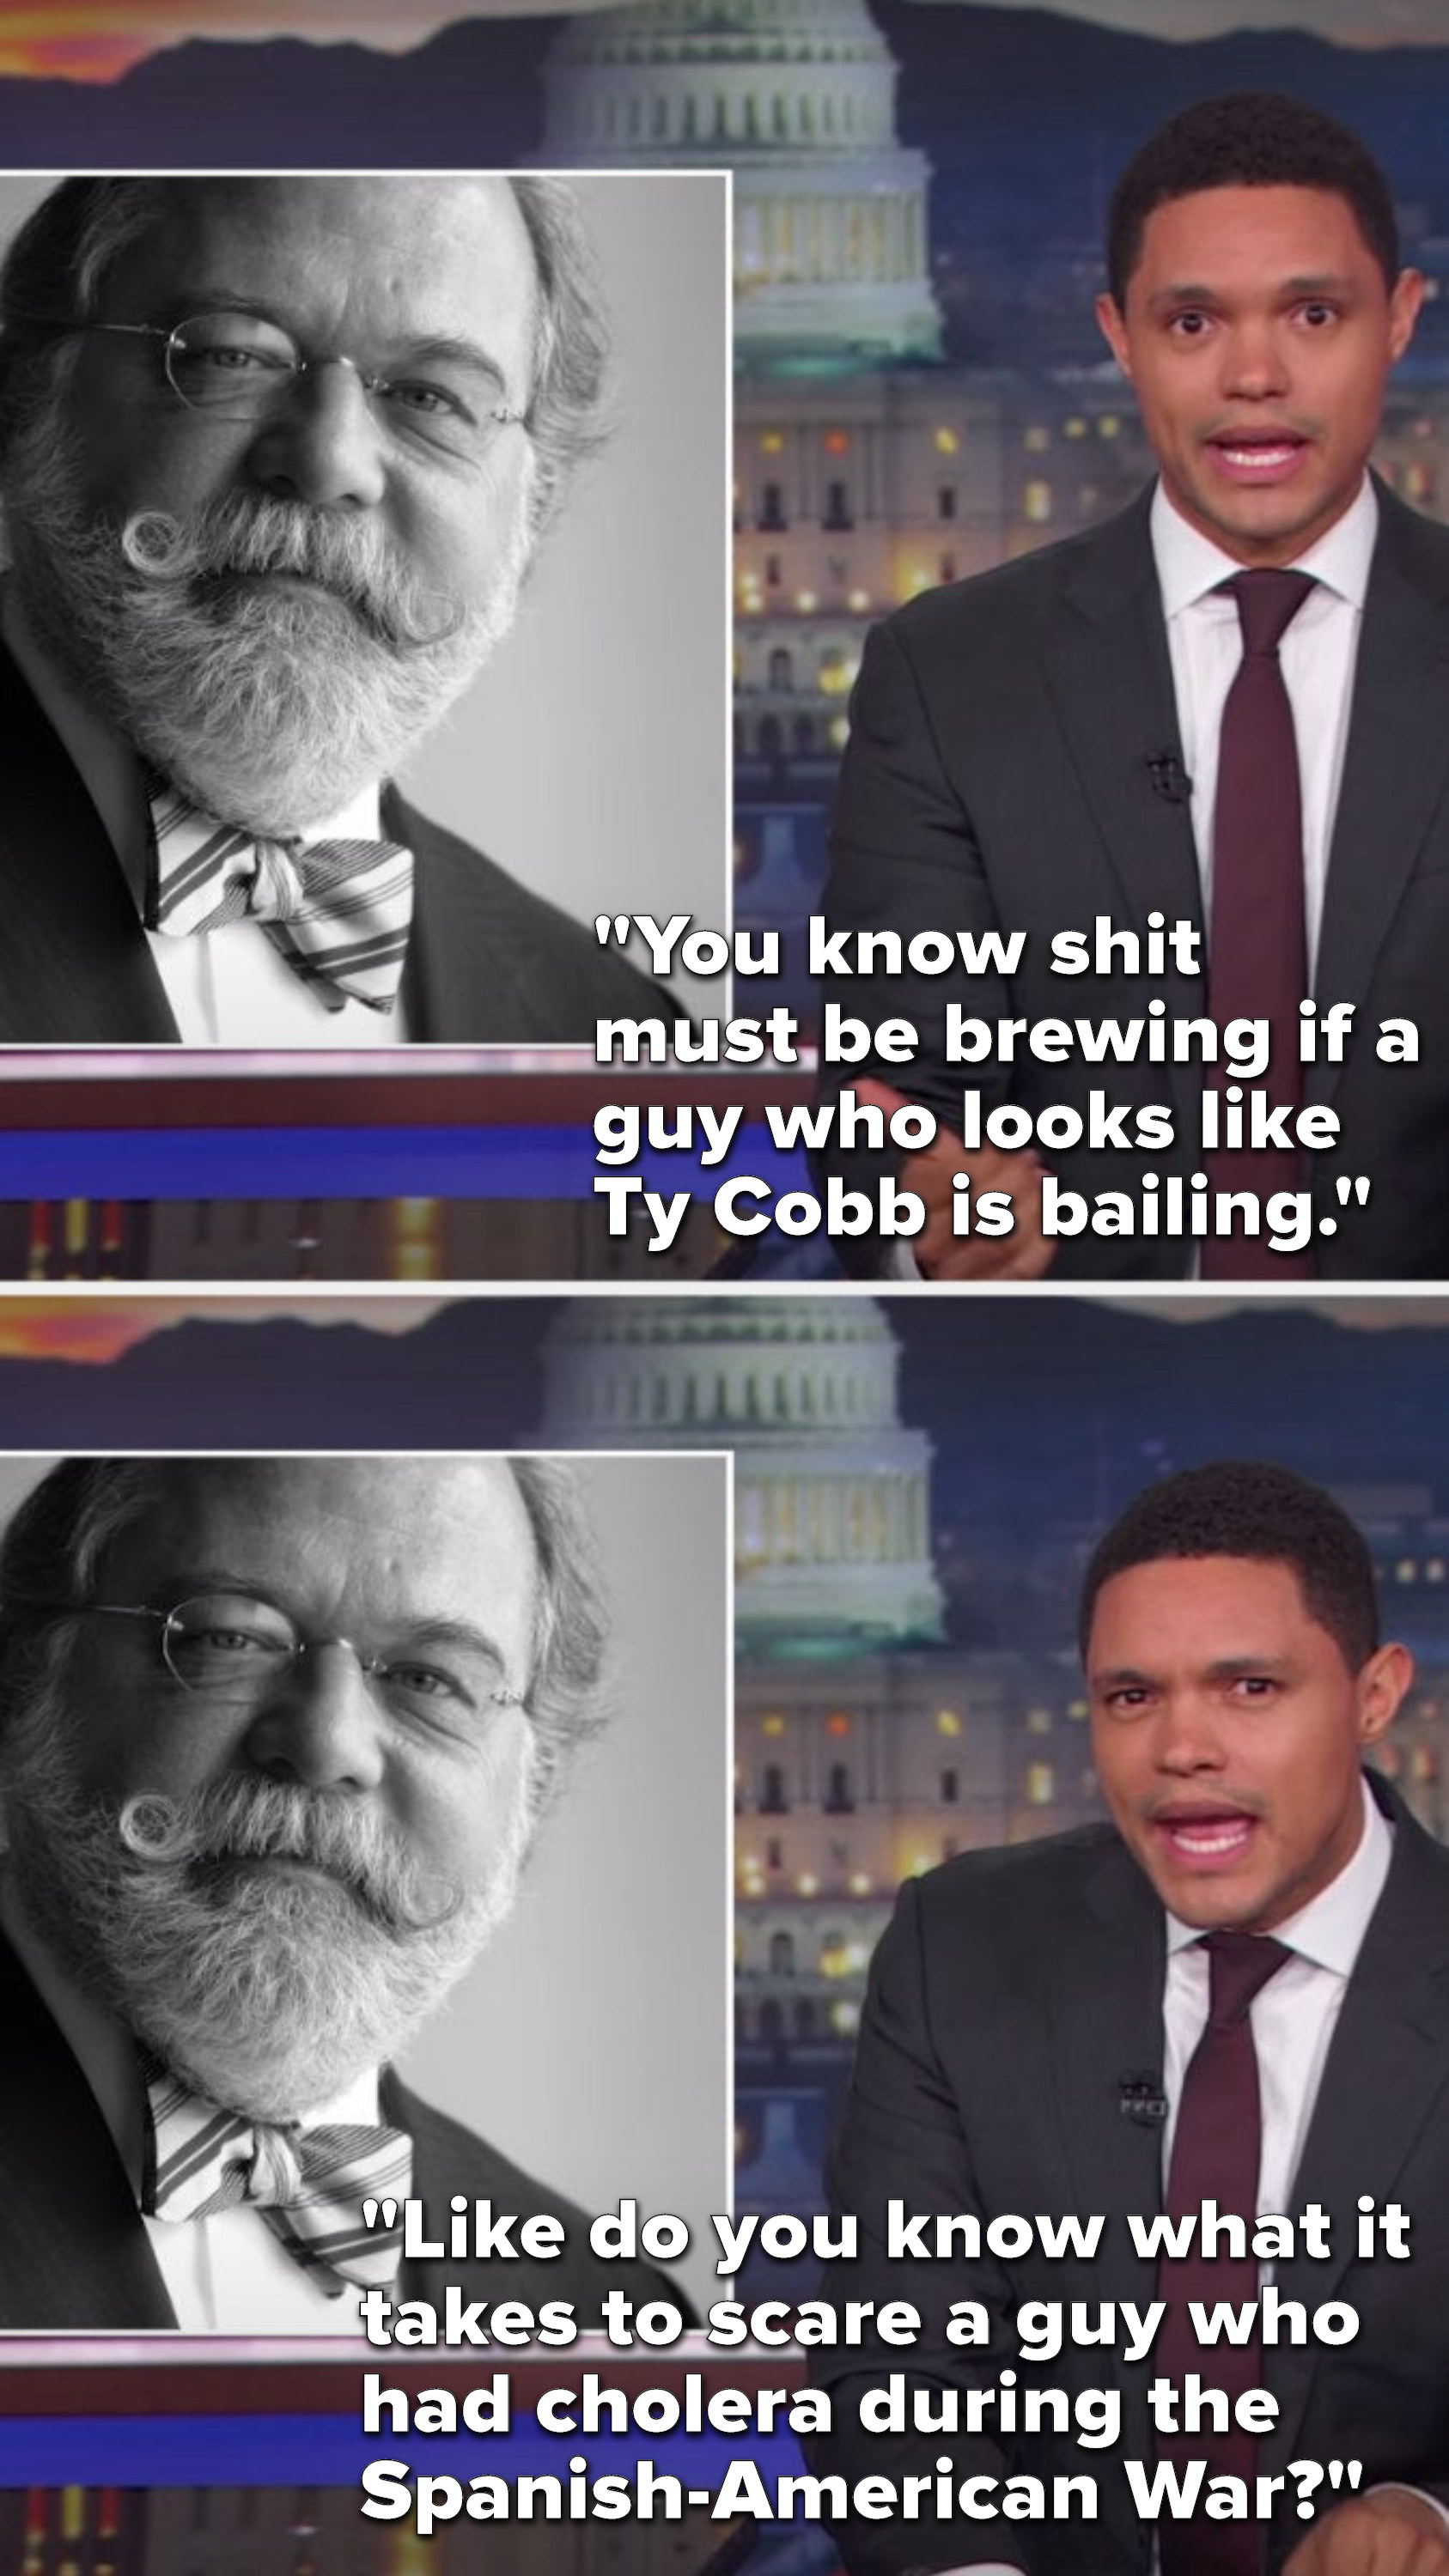 Next to a picture of a man who looks like Santa, Noah says, &quot;You know shit must be brewing if a guy who looks like Ty Cobb is bailing, like do you know what it takes to scare a guy who had cholera during the Spanish-American War&quot;